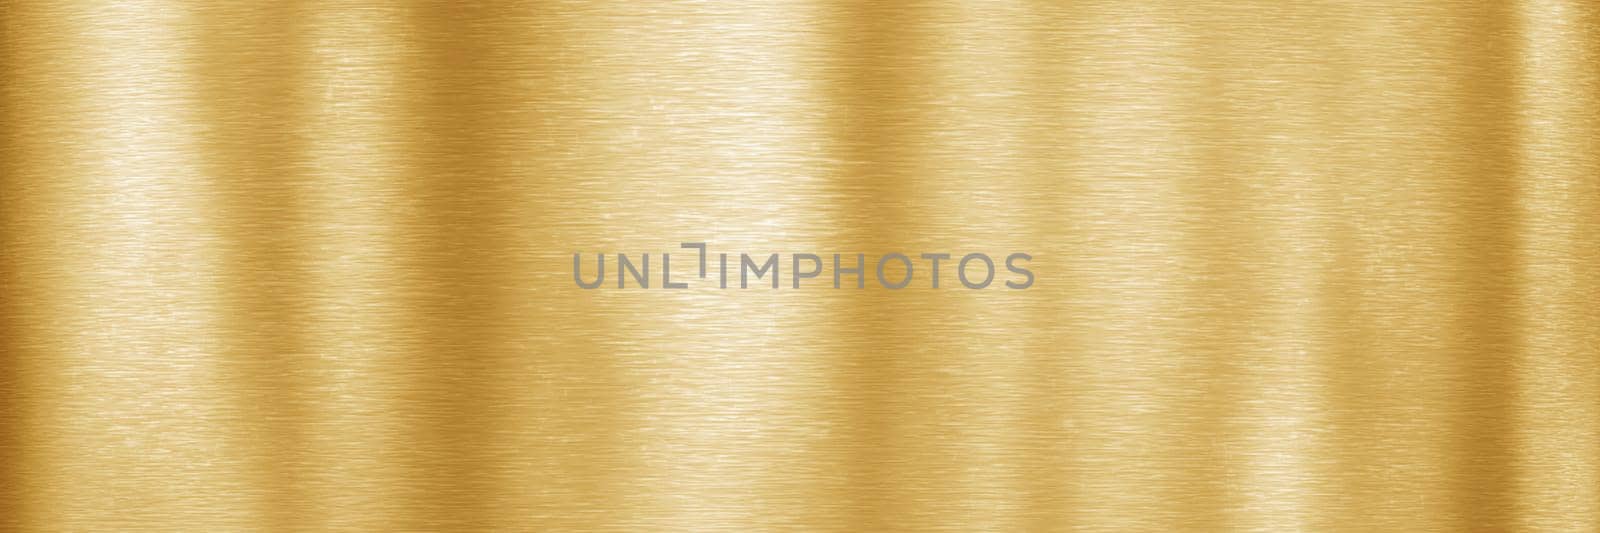 Golden industrial background and stainless steel texture. 3d rendering